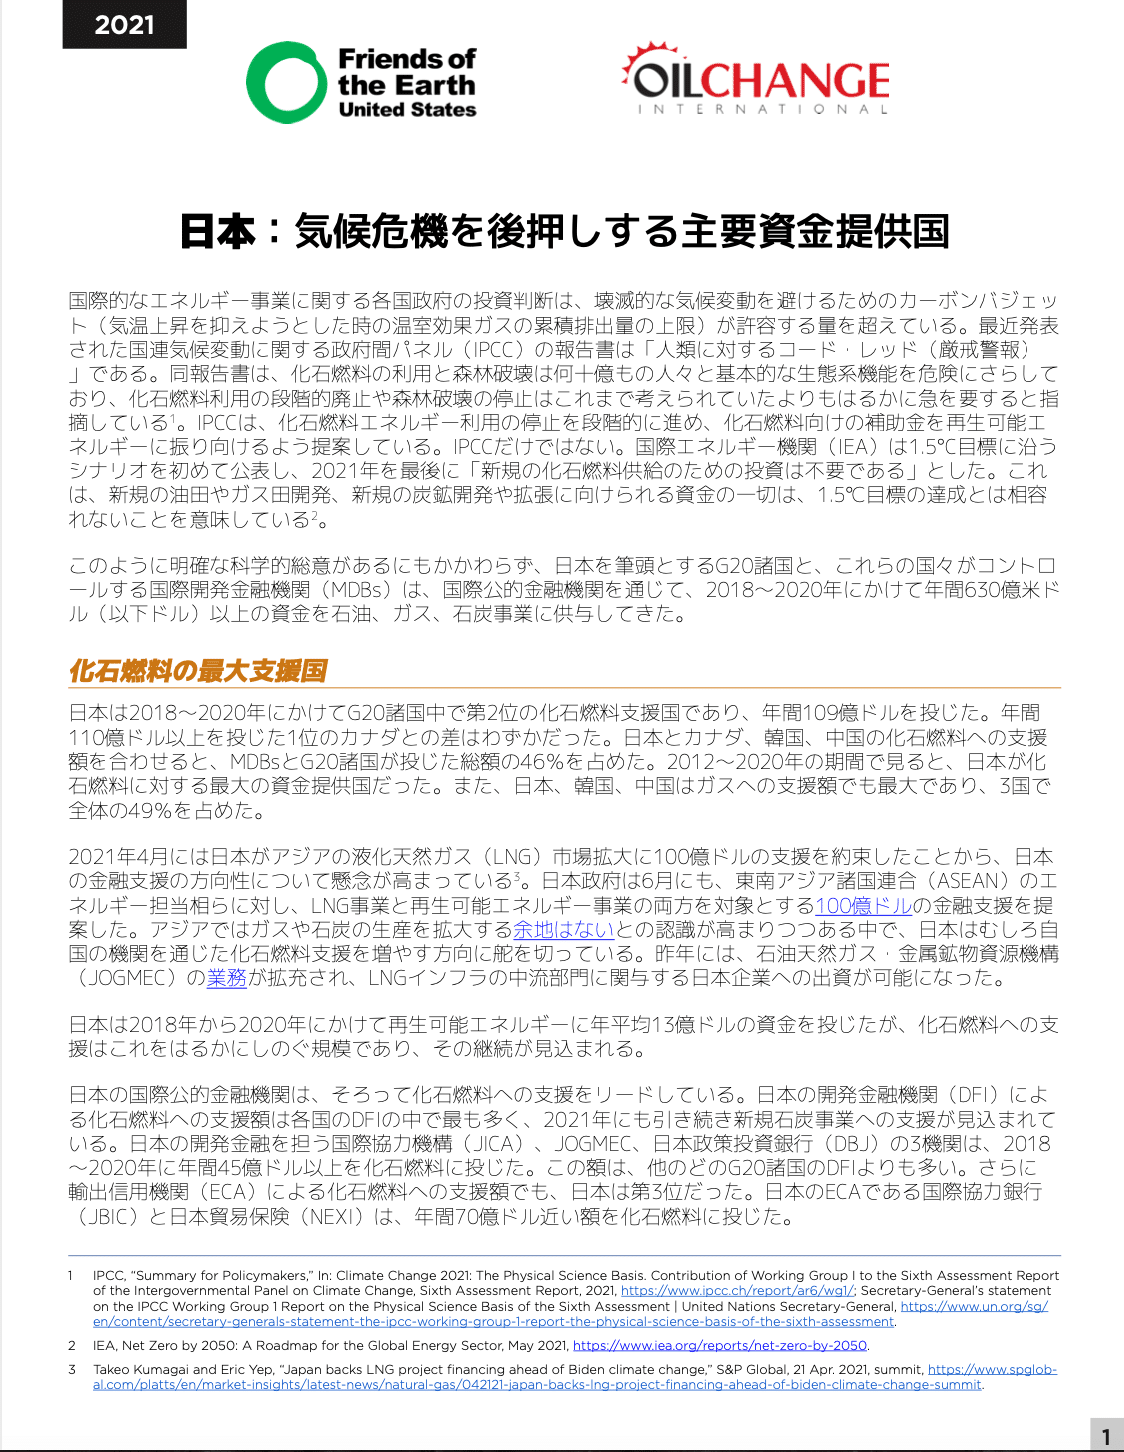 Public Energy Finance Briefing (in Japanese)